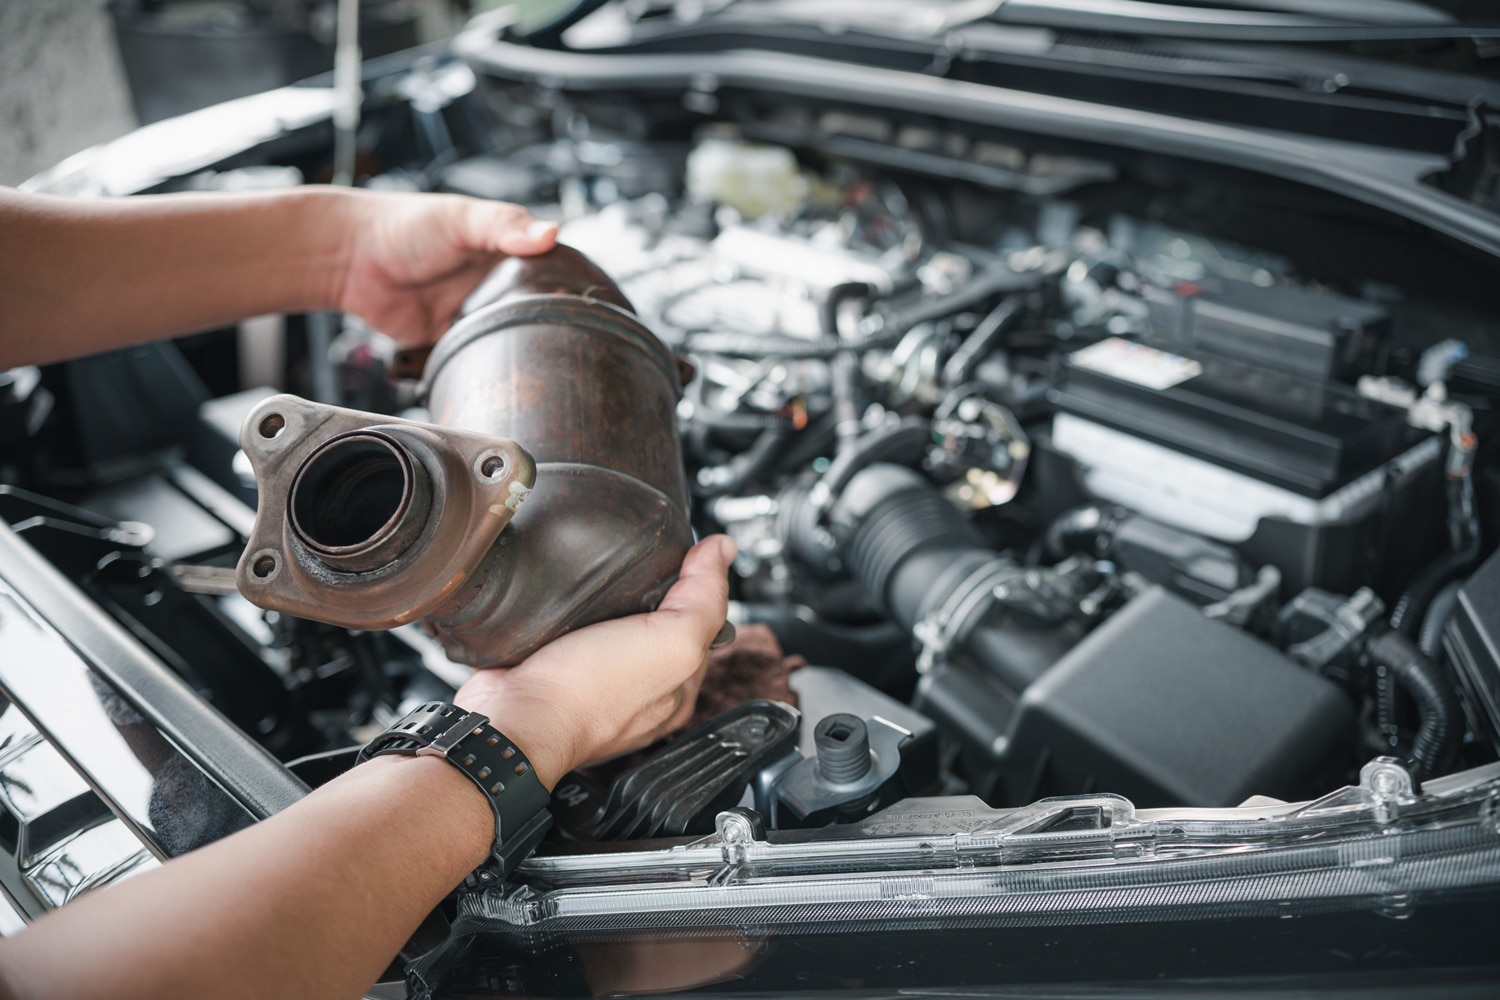 Car Sales Advice: Do I Need to Repair My Vehicle Before Selling?